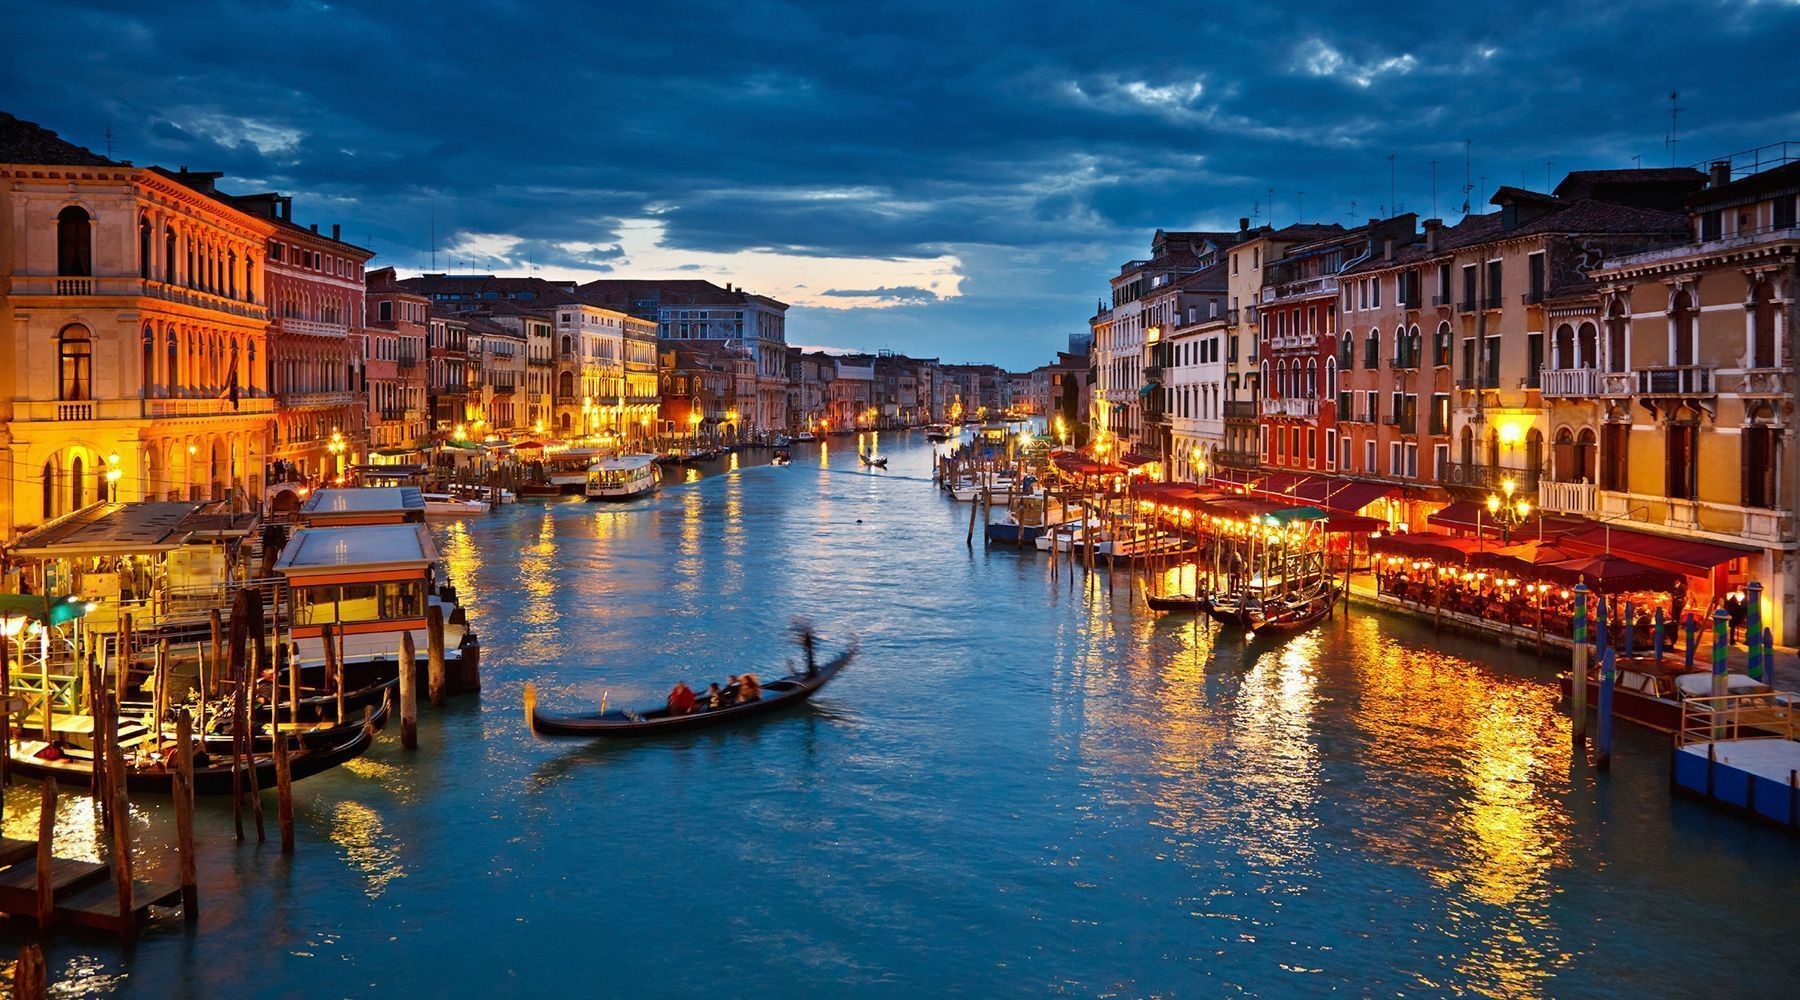 Night view of the inland channels in Venice